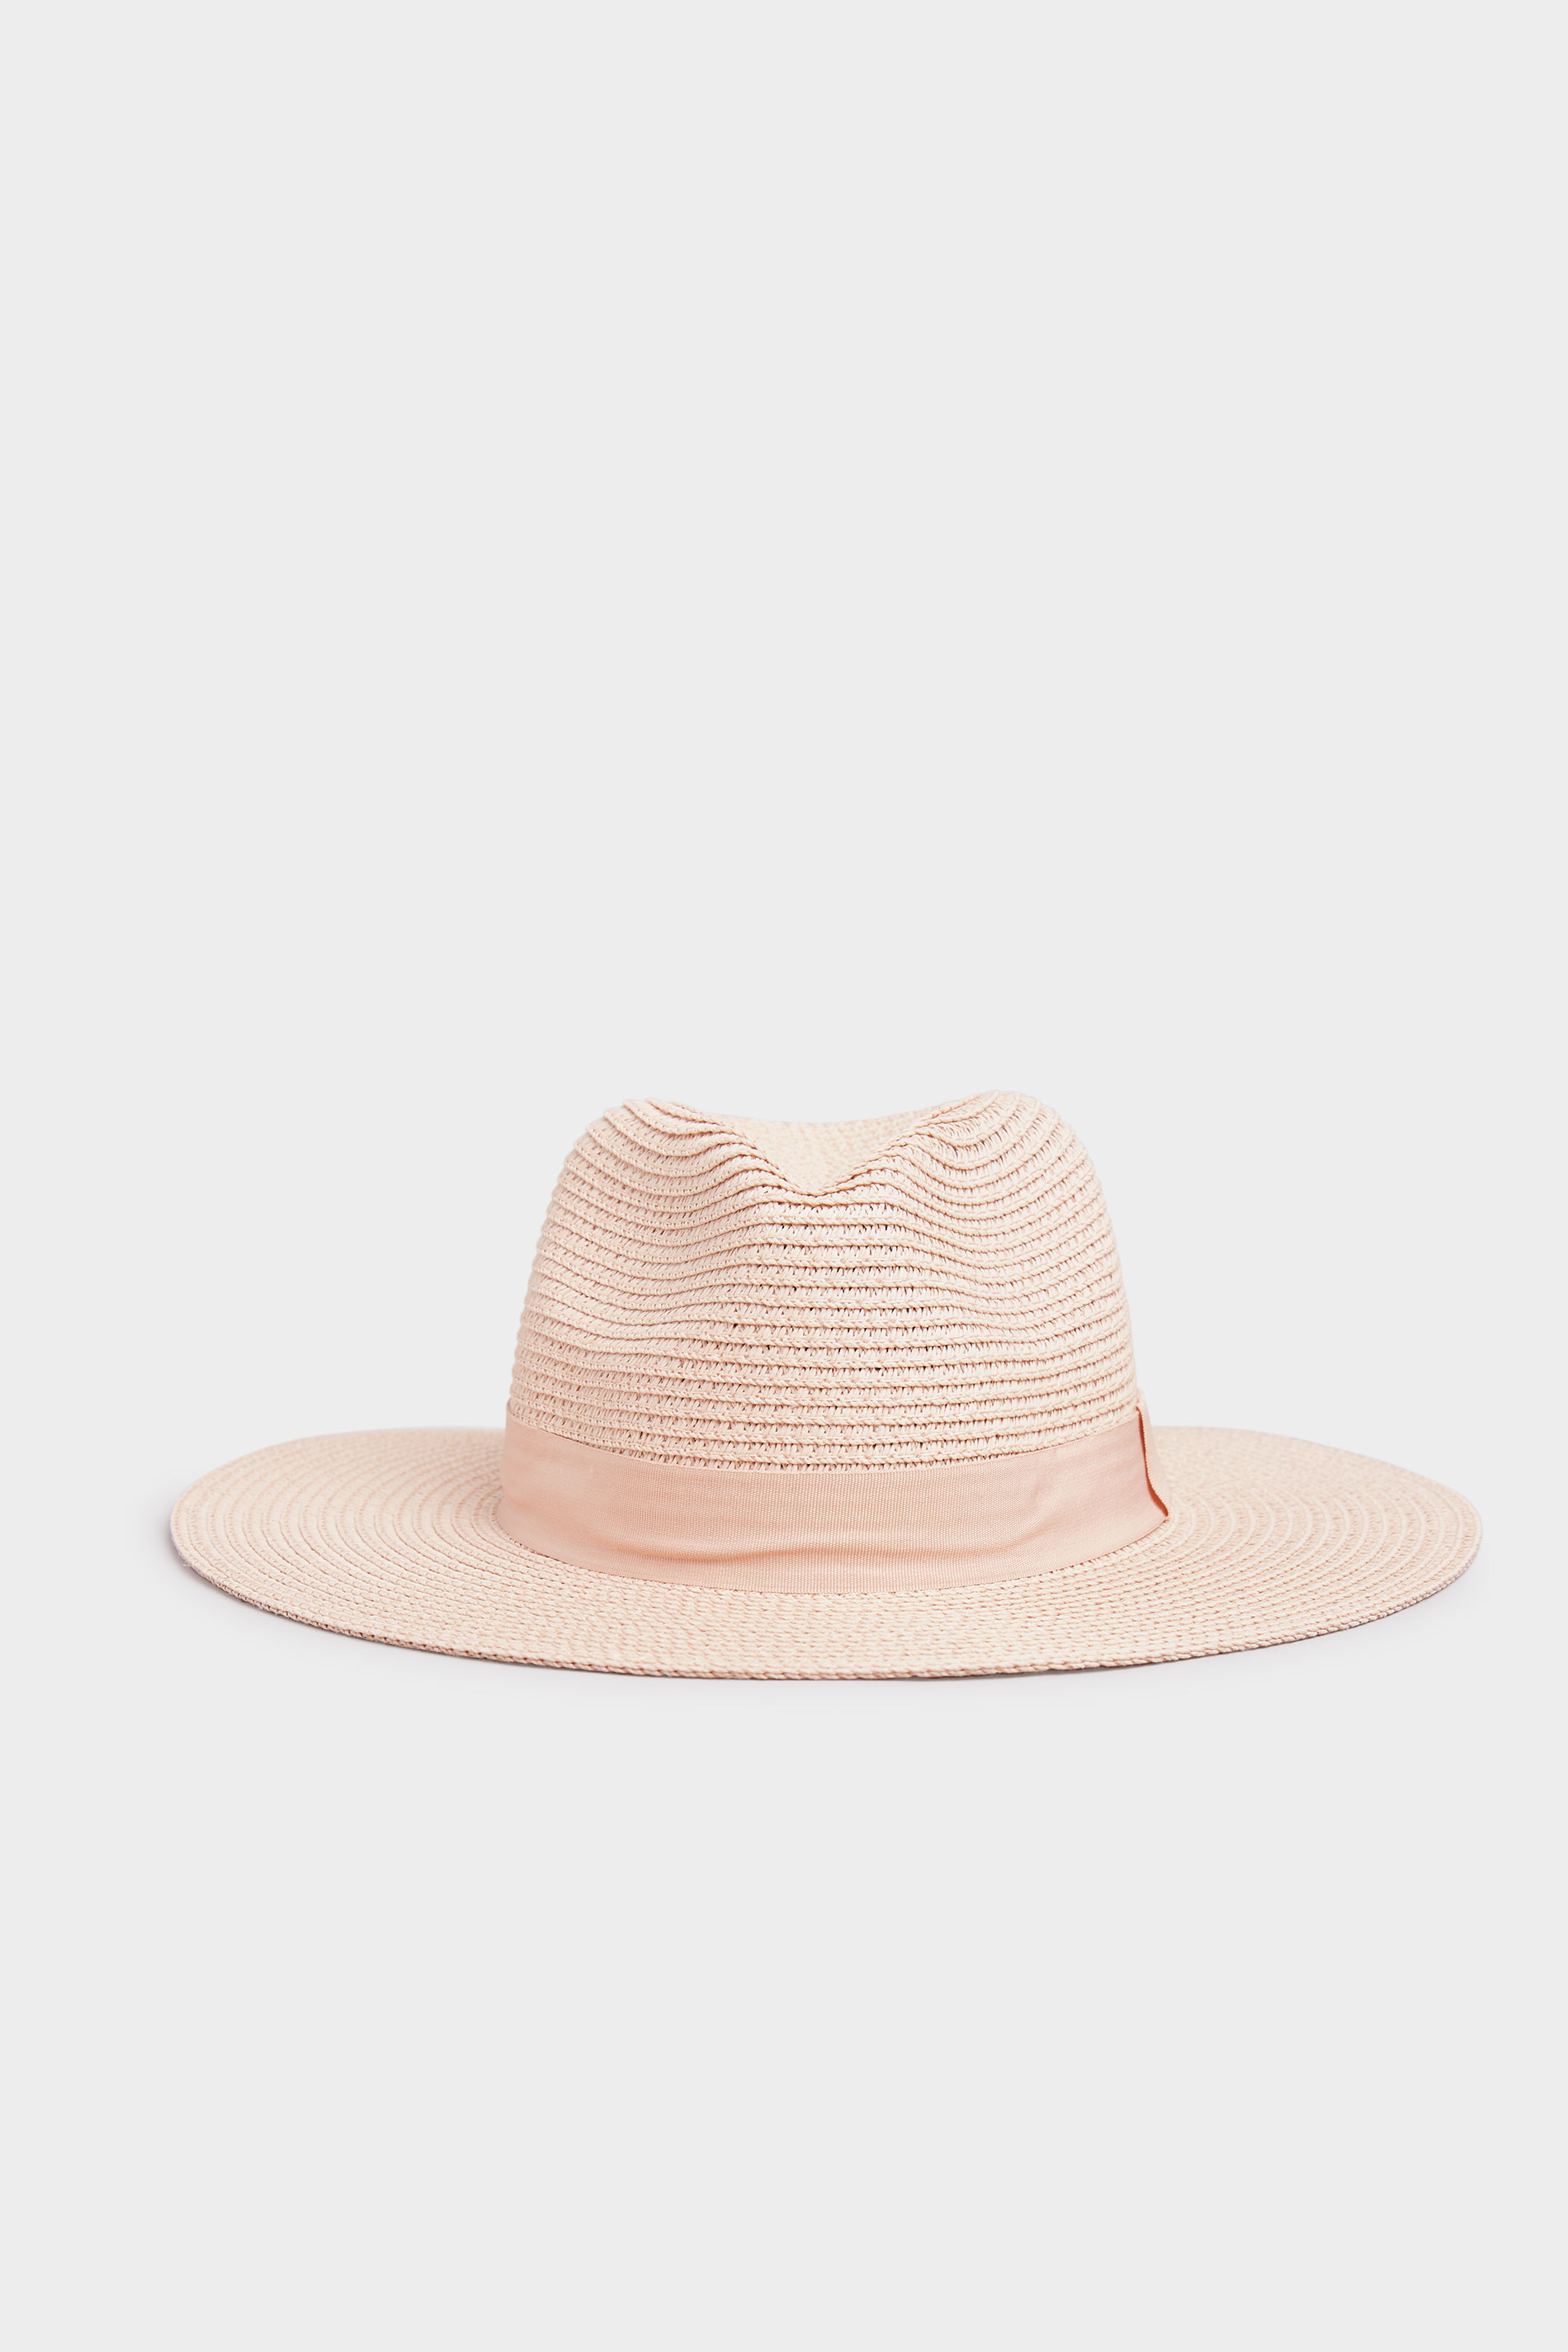 Plus Size Pink Straw Fedora Hat | Yours Clothing 1